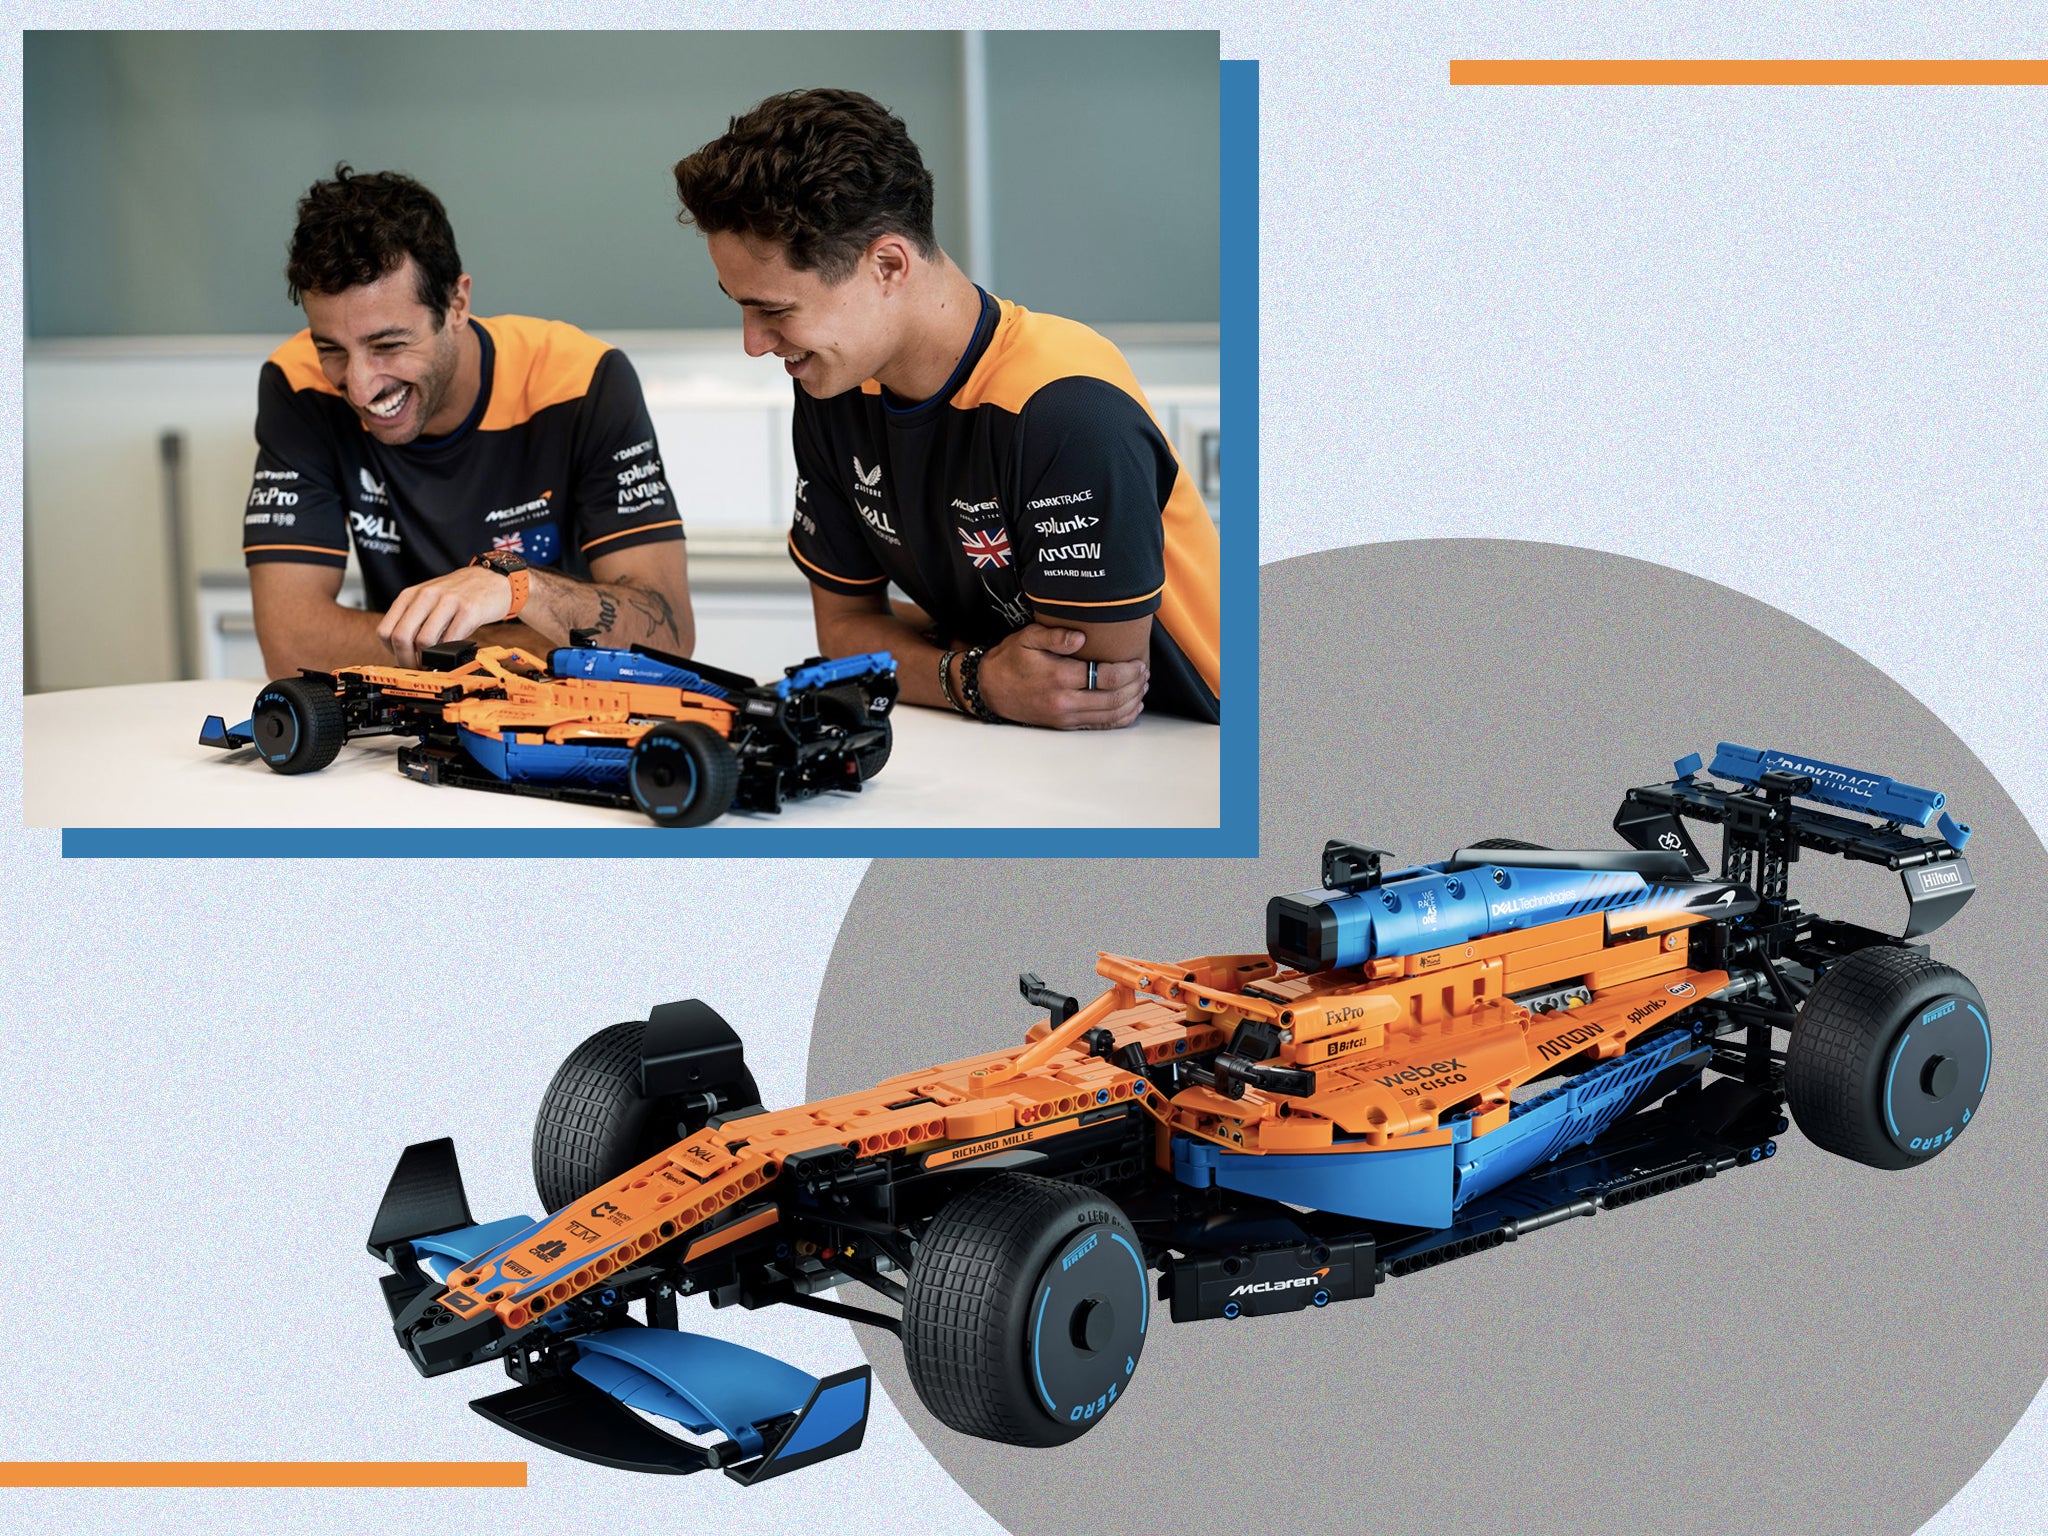 Lego’s McLaren F1 car is out now Where to buy the MCL3 replica The